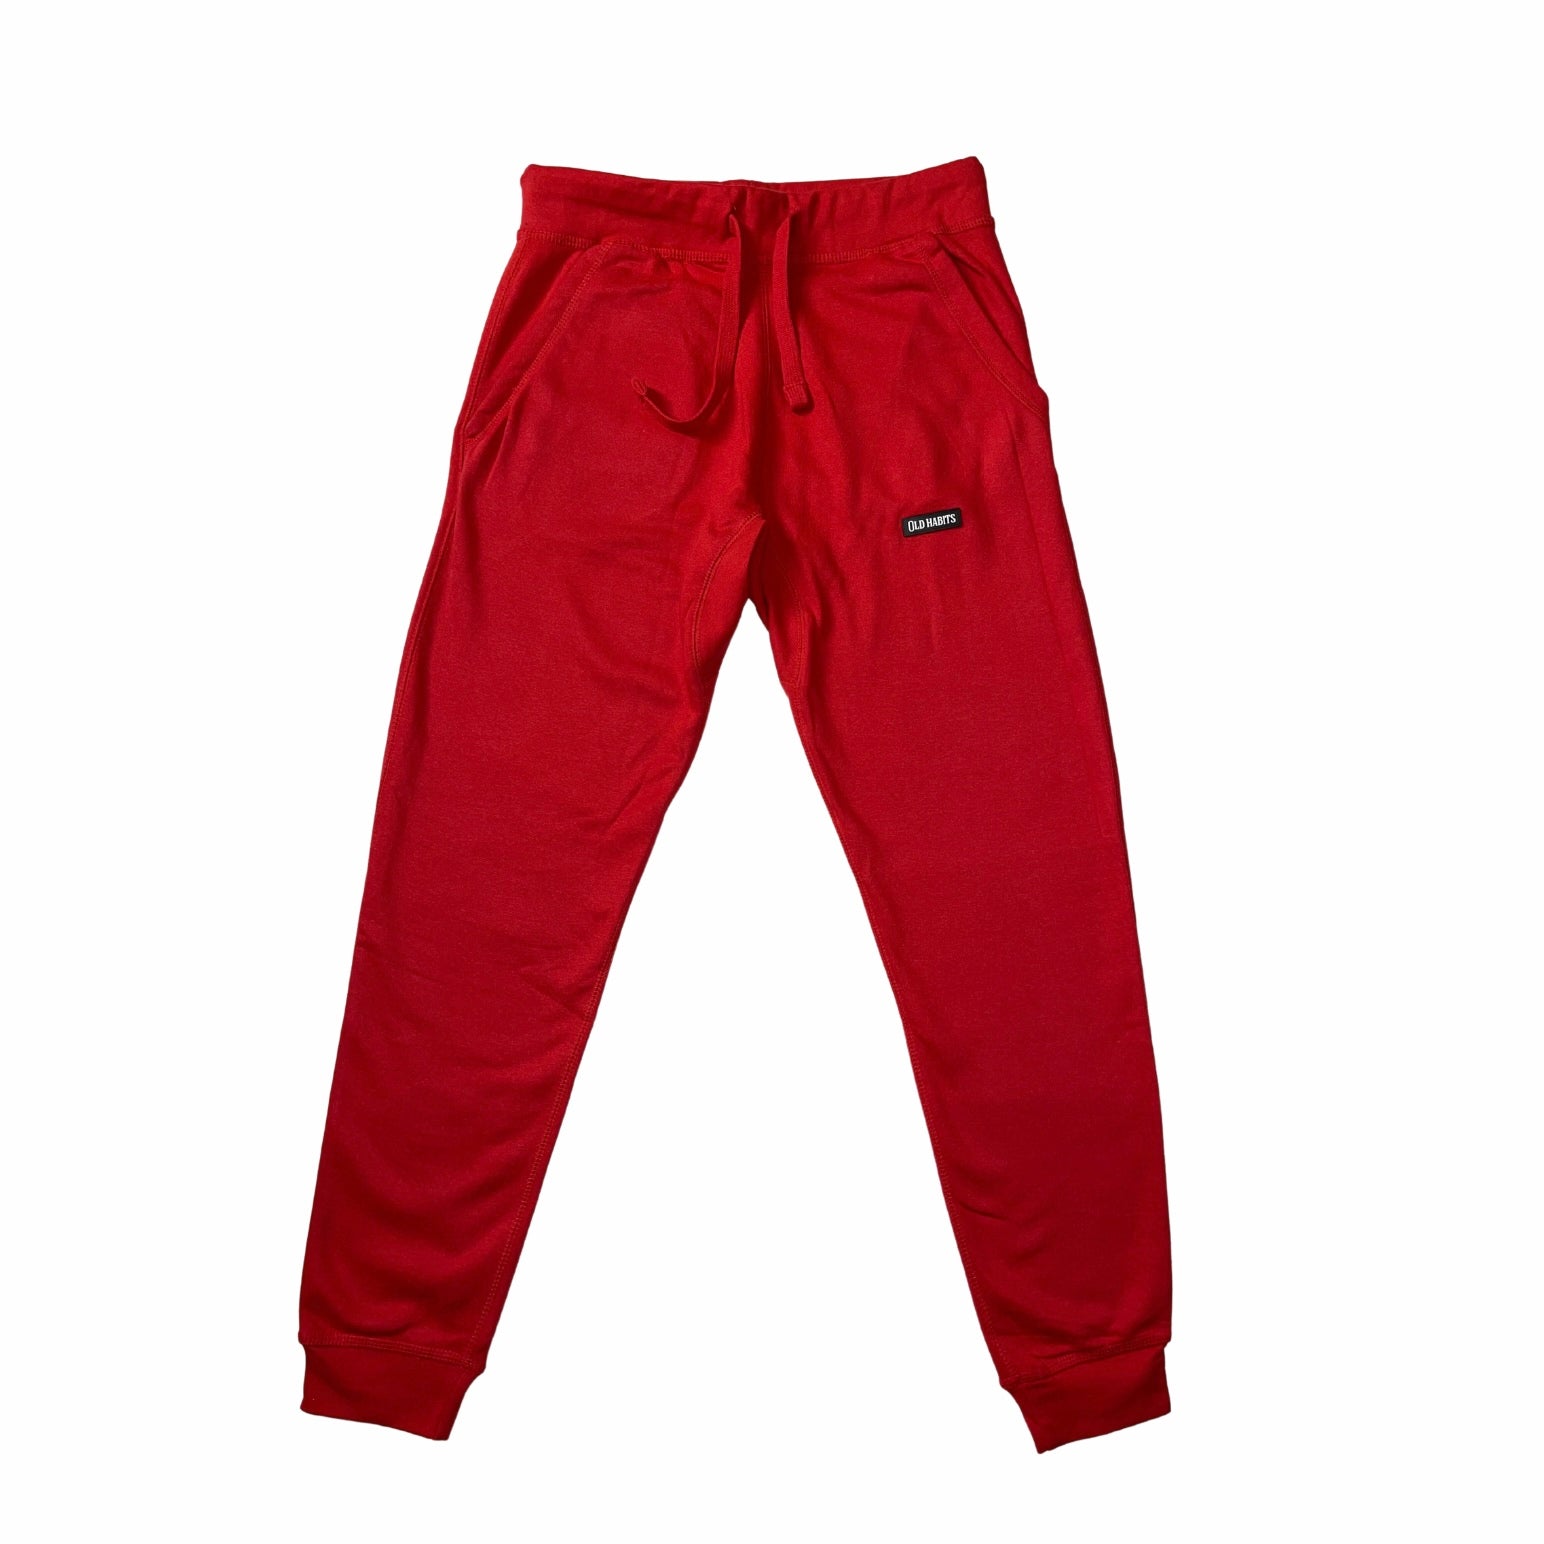 Affordable Wholesale red jogger sweatpants For Trendsetting Looks 